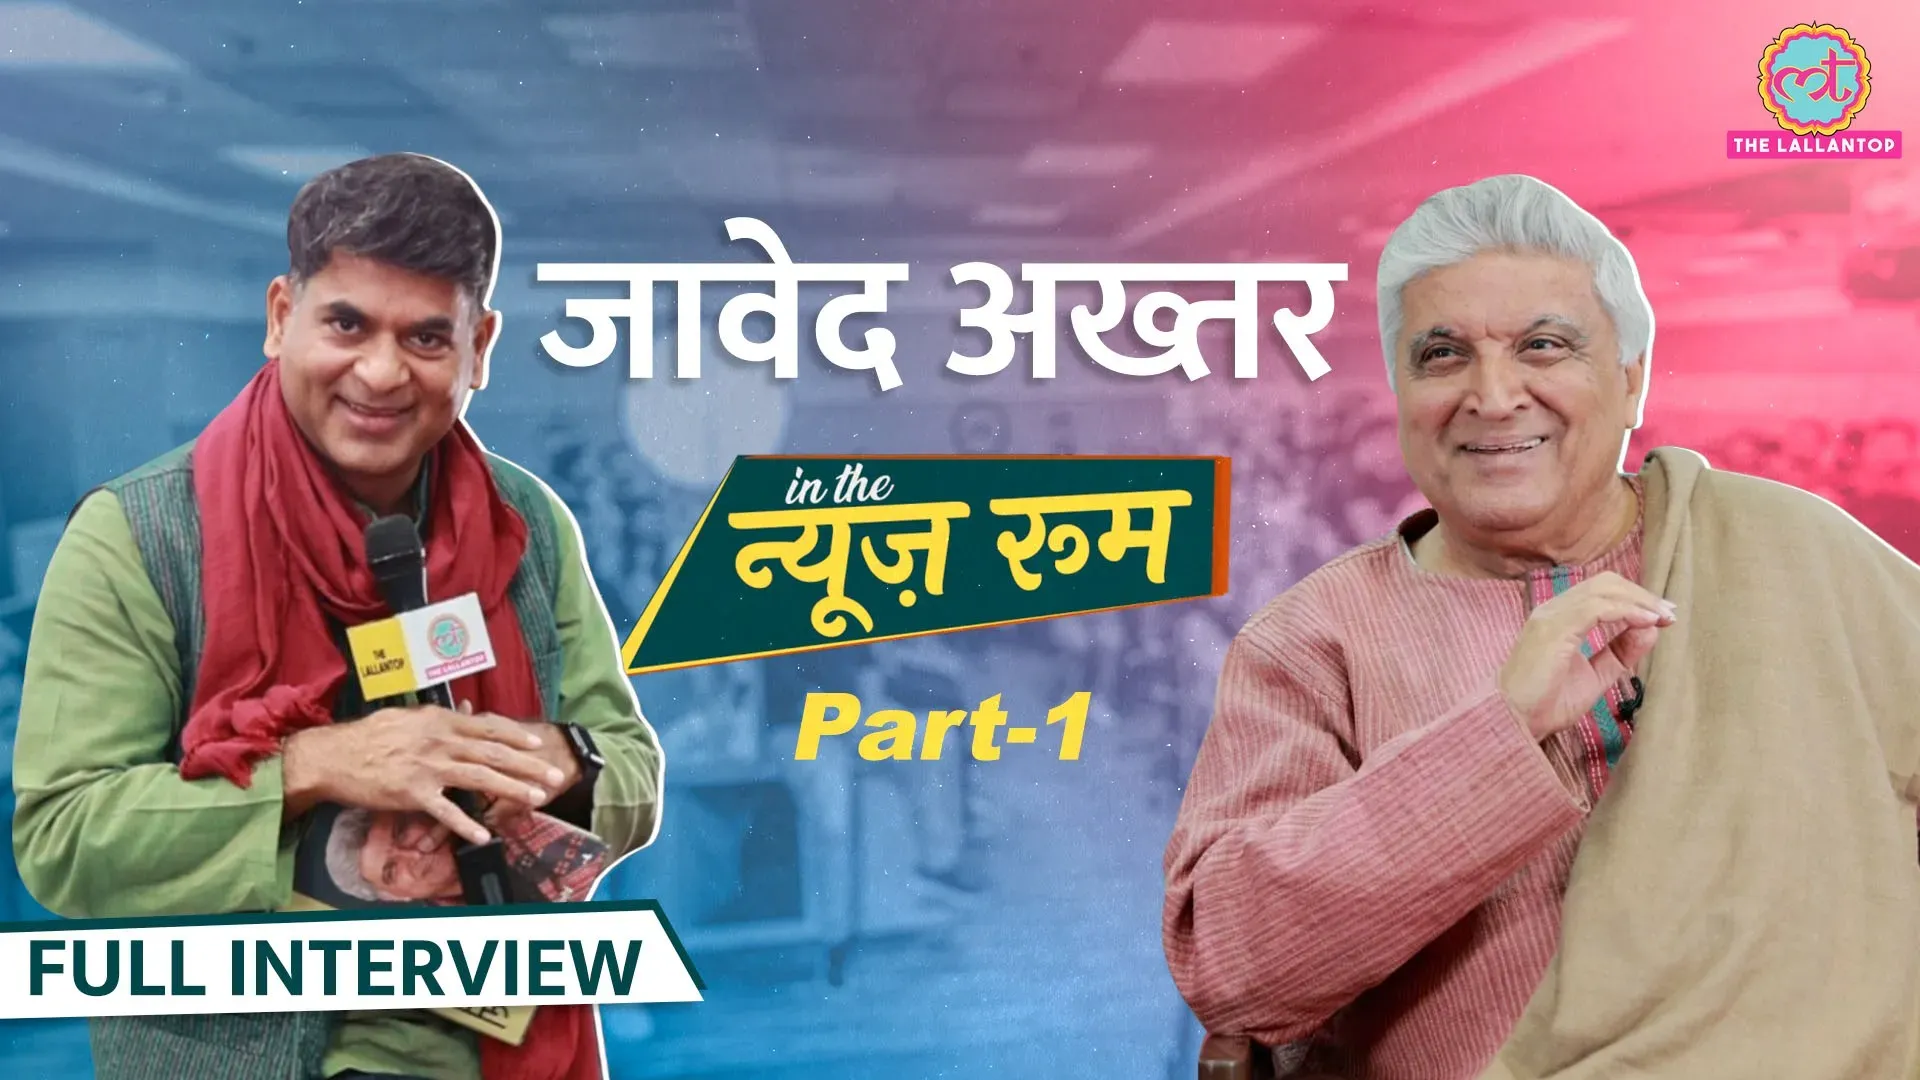 Javed Akhtar Lallantop Guest in the Newsroom 